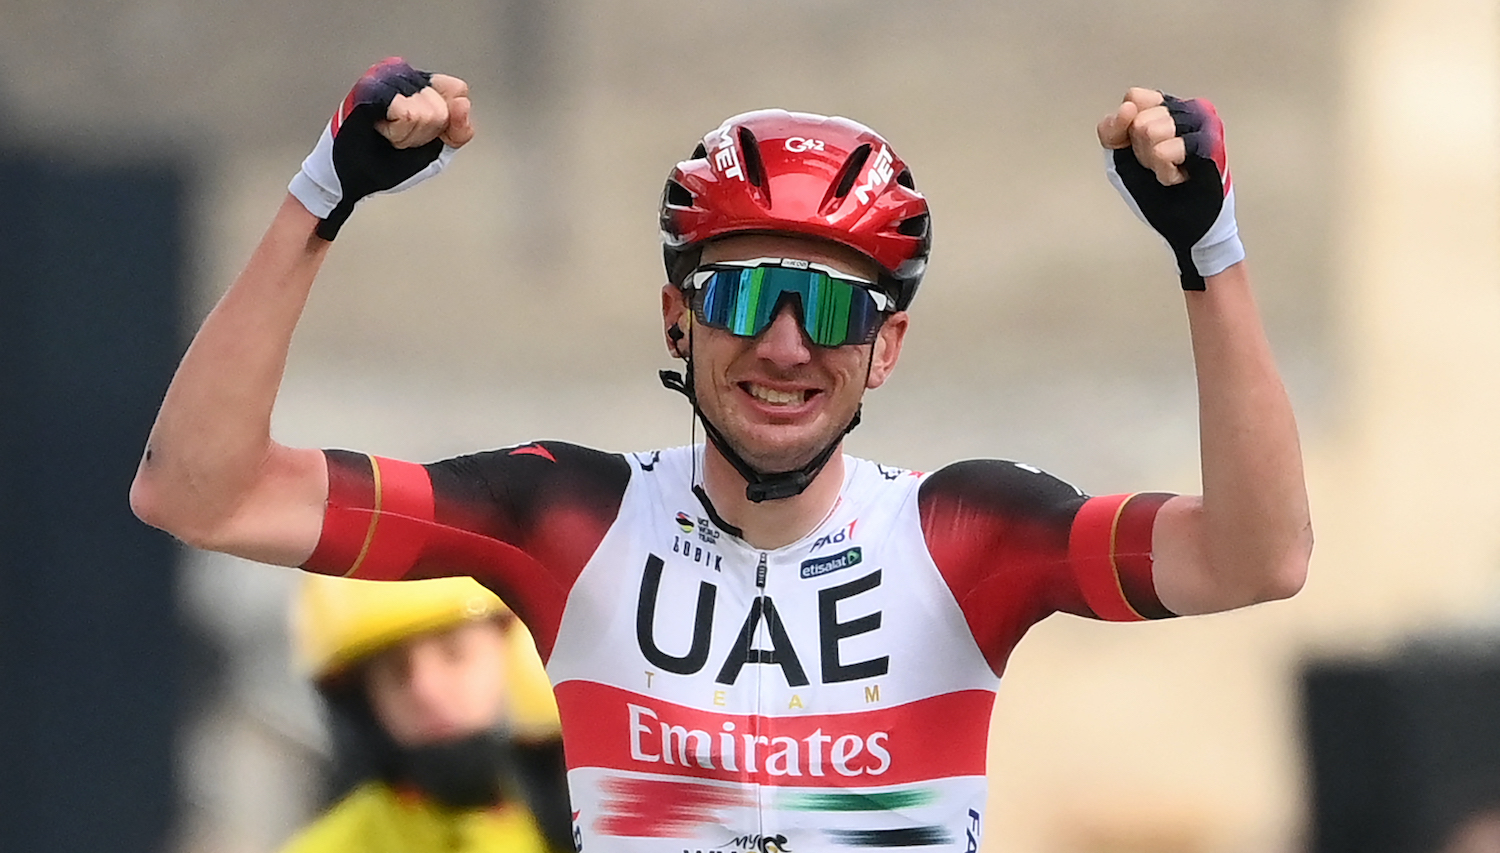 UAE Team Emirates US rider Brandon McNulty celebrates as he crosses the finish line to win the 5th stage of the 80th Paris - Nice cycling race, 189 km between Saint-Just-Saint-Rambert and Saint-Sauveur-de-Montagut, on March 10, 2022. (Photo by FRANCK FIFE / AFP) (Photo by FRANCK FIFE/AFP via Getty Images)